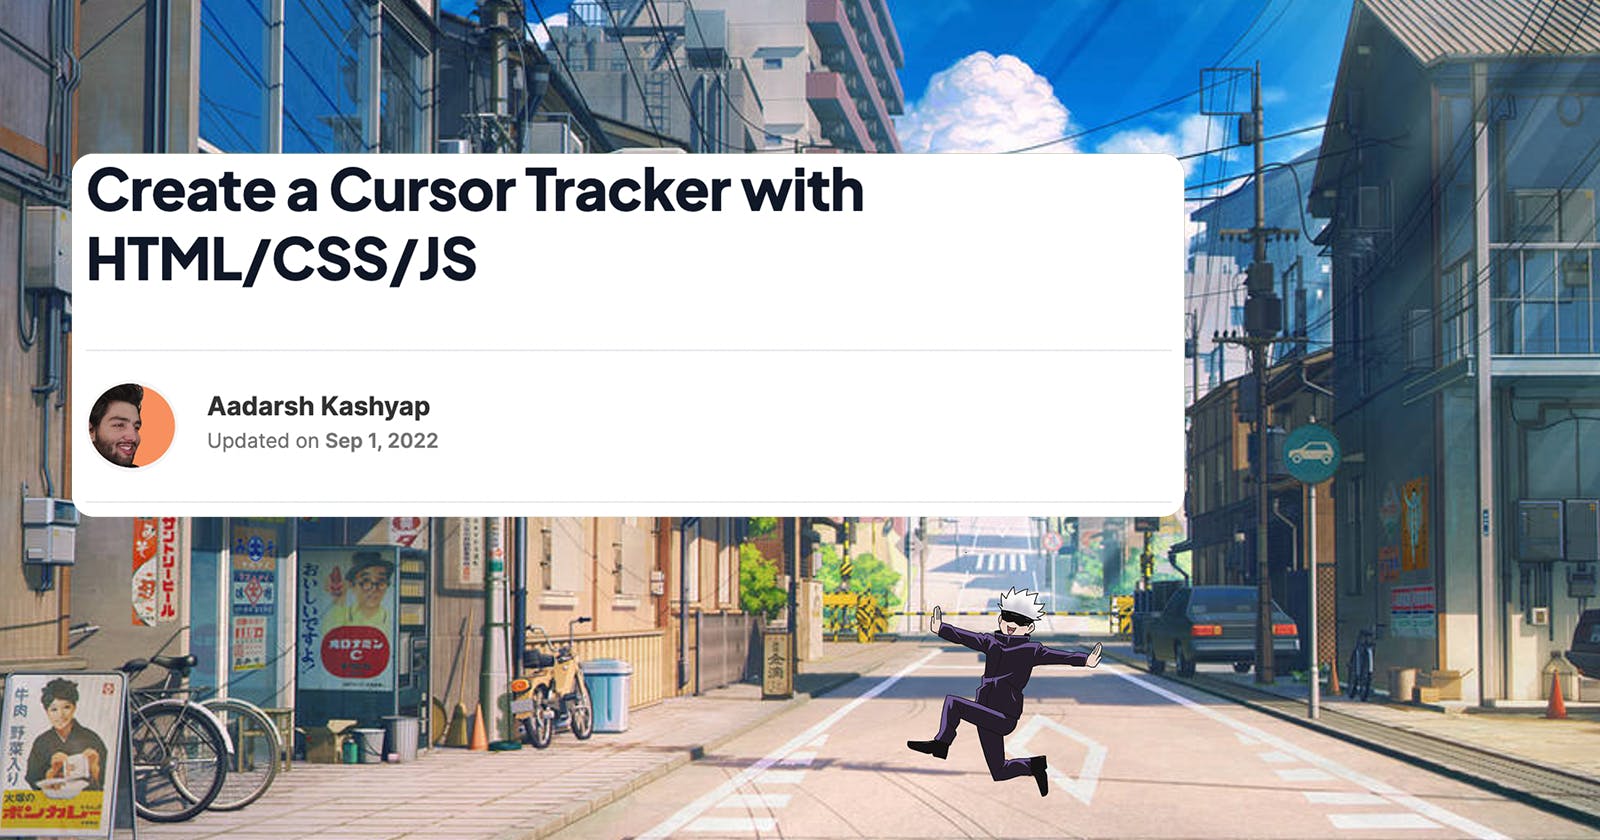 Create a Cursor Tracker with HTML/CSS/JS